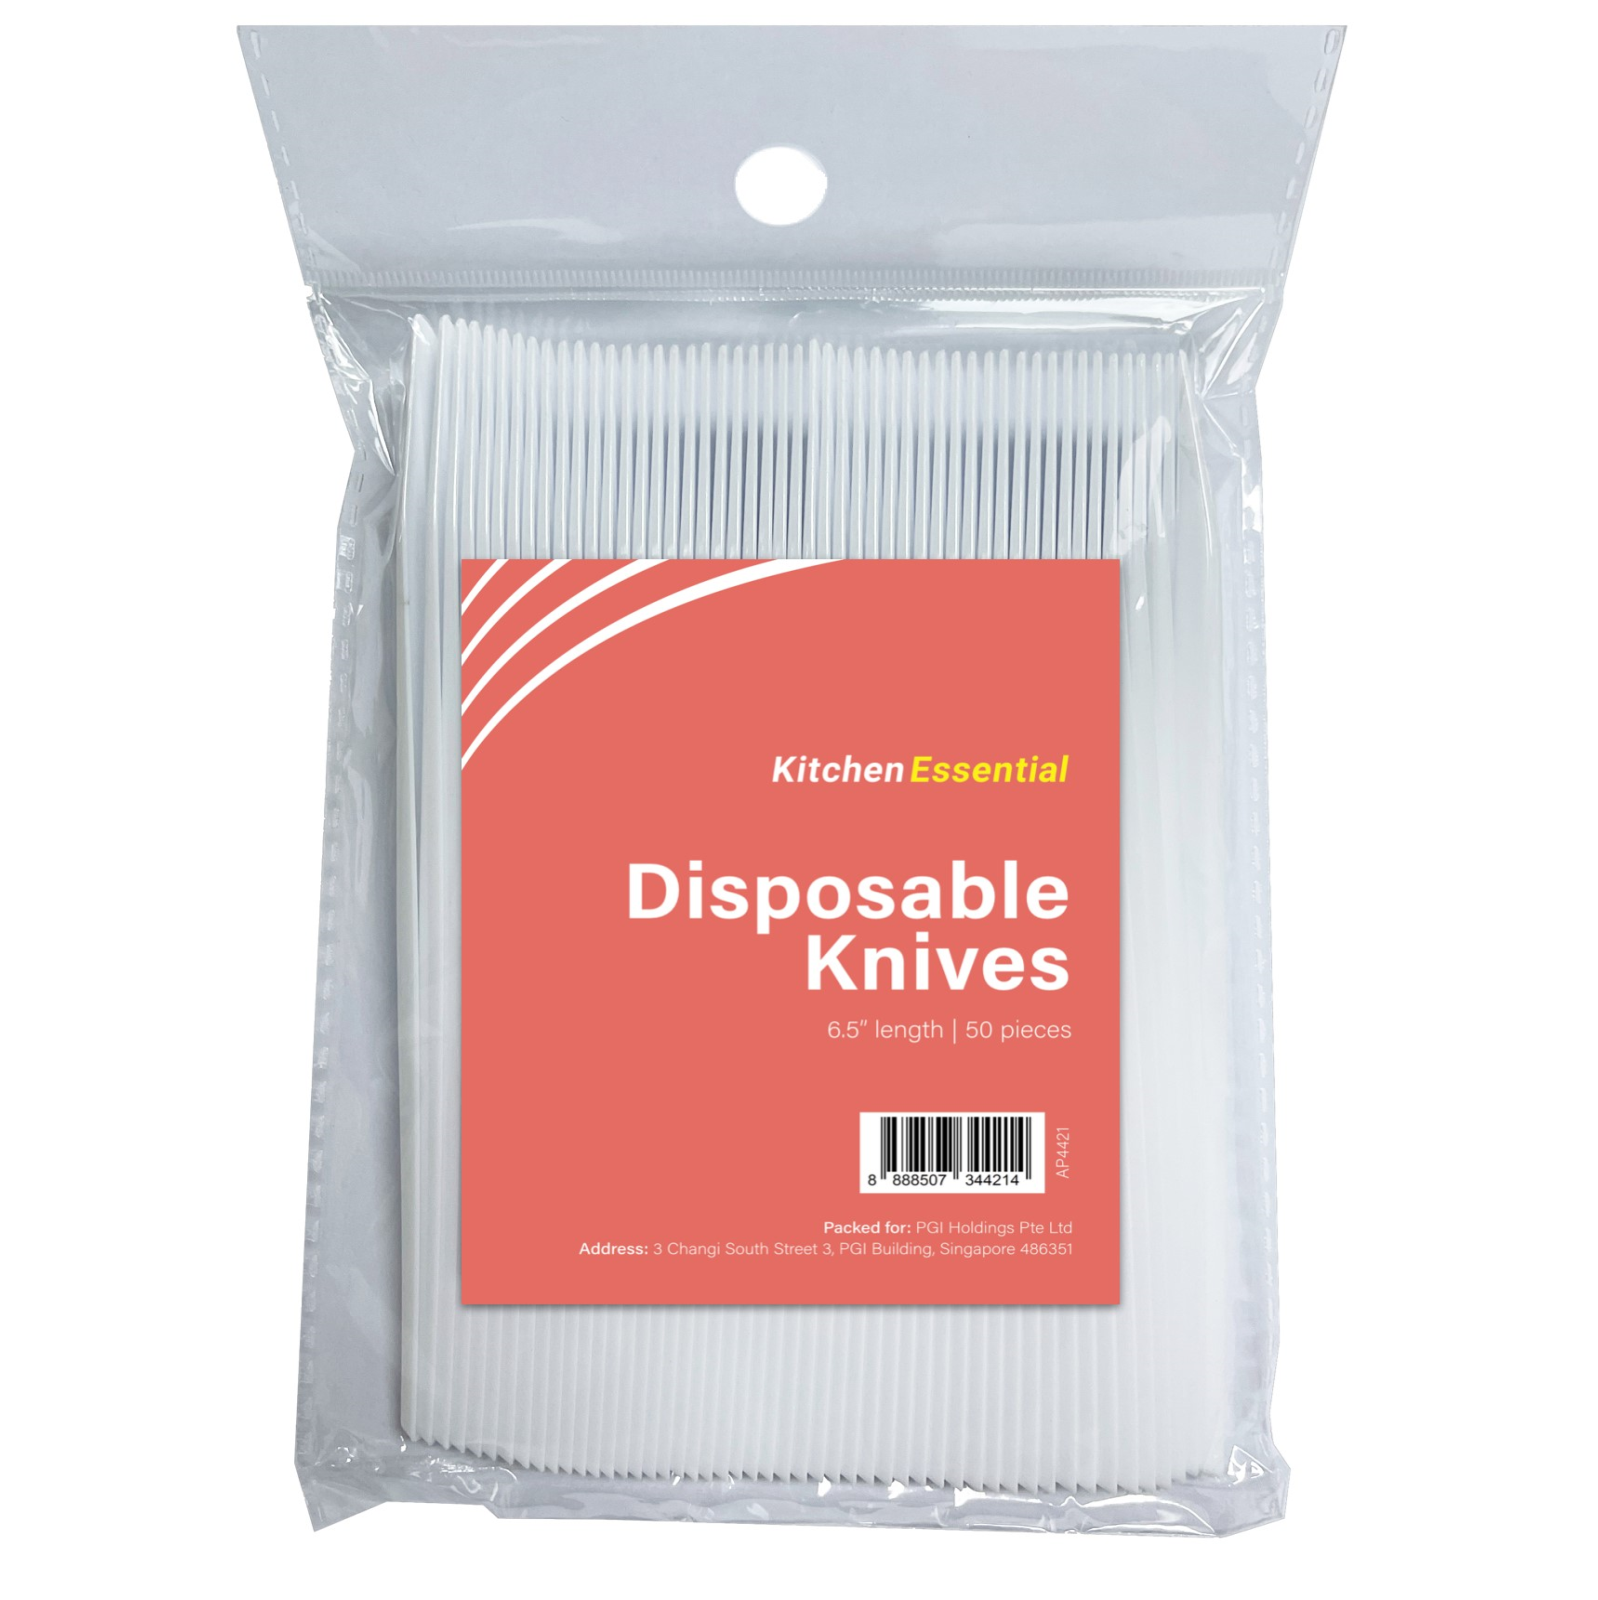 KITCHEN ESSENTIAL Disposable Knife 50PC/PACK 6.5" LENGTH